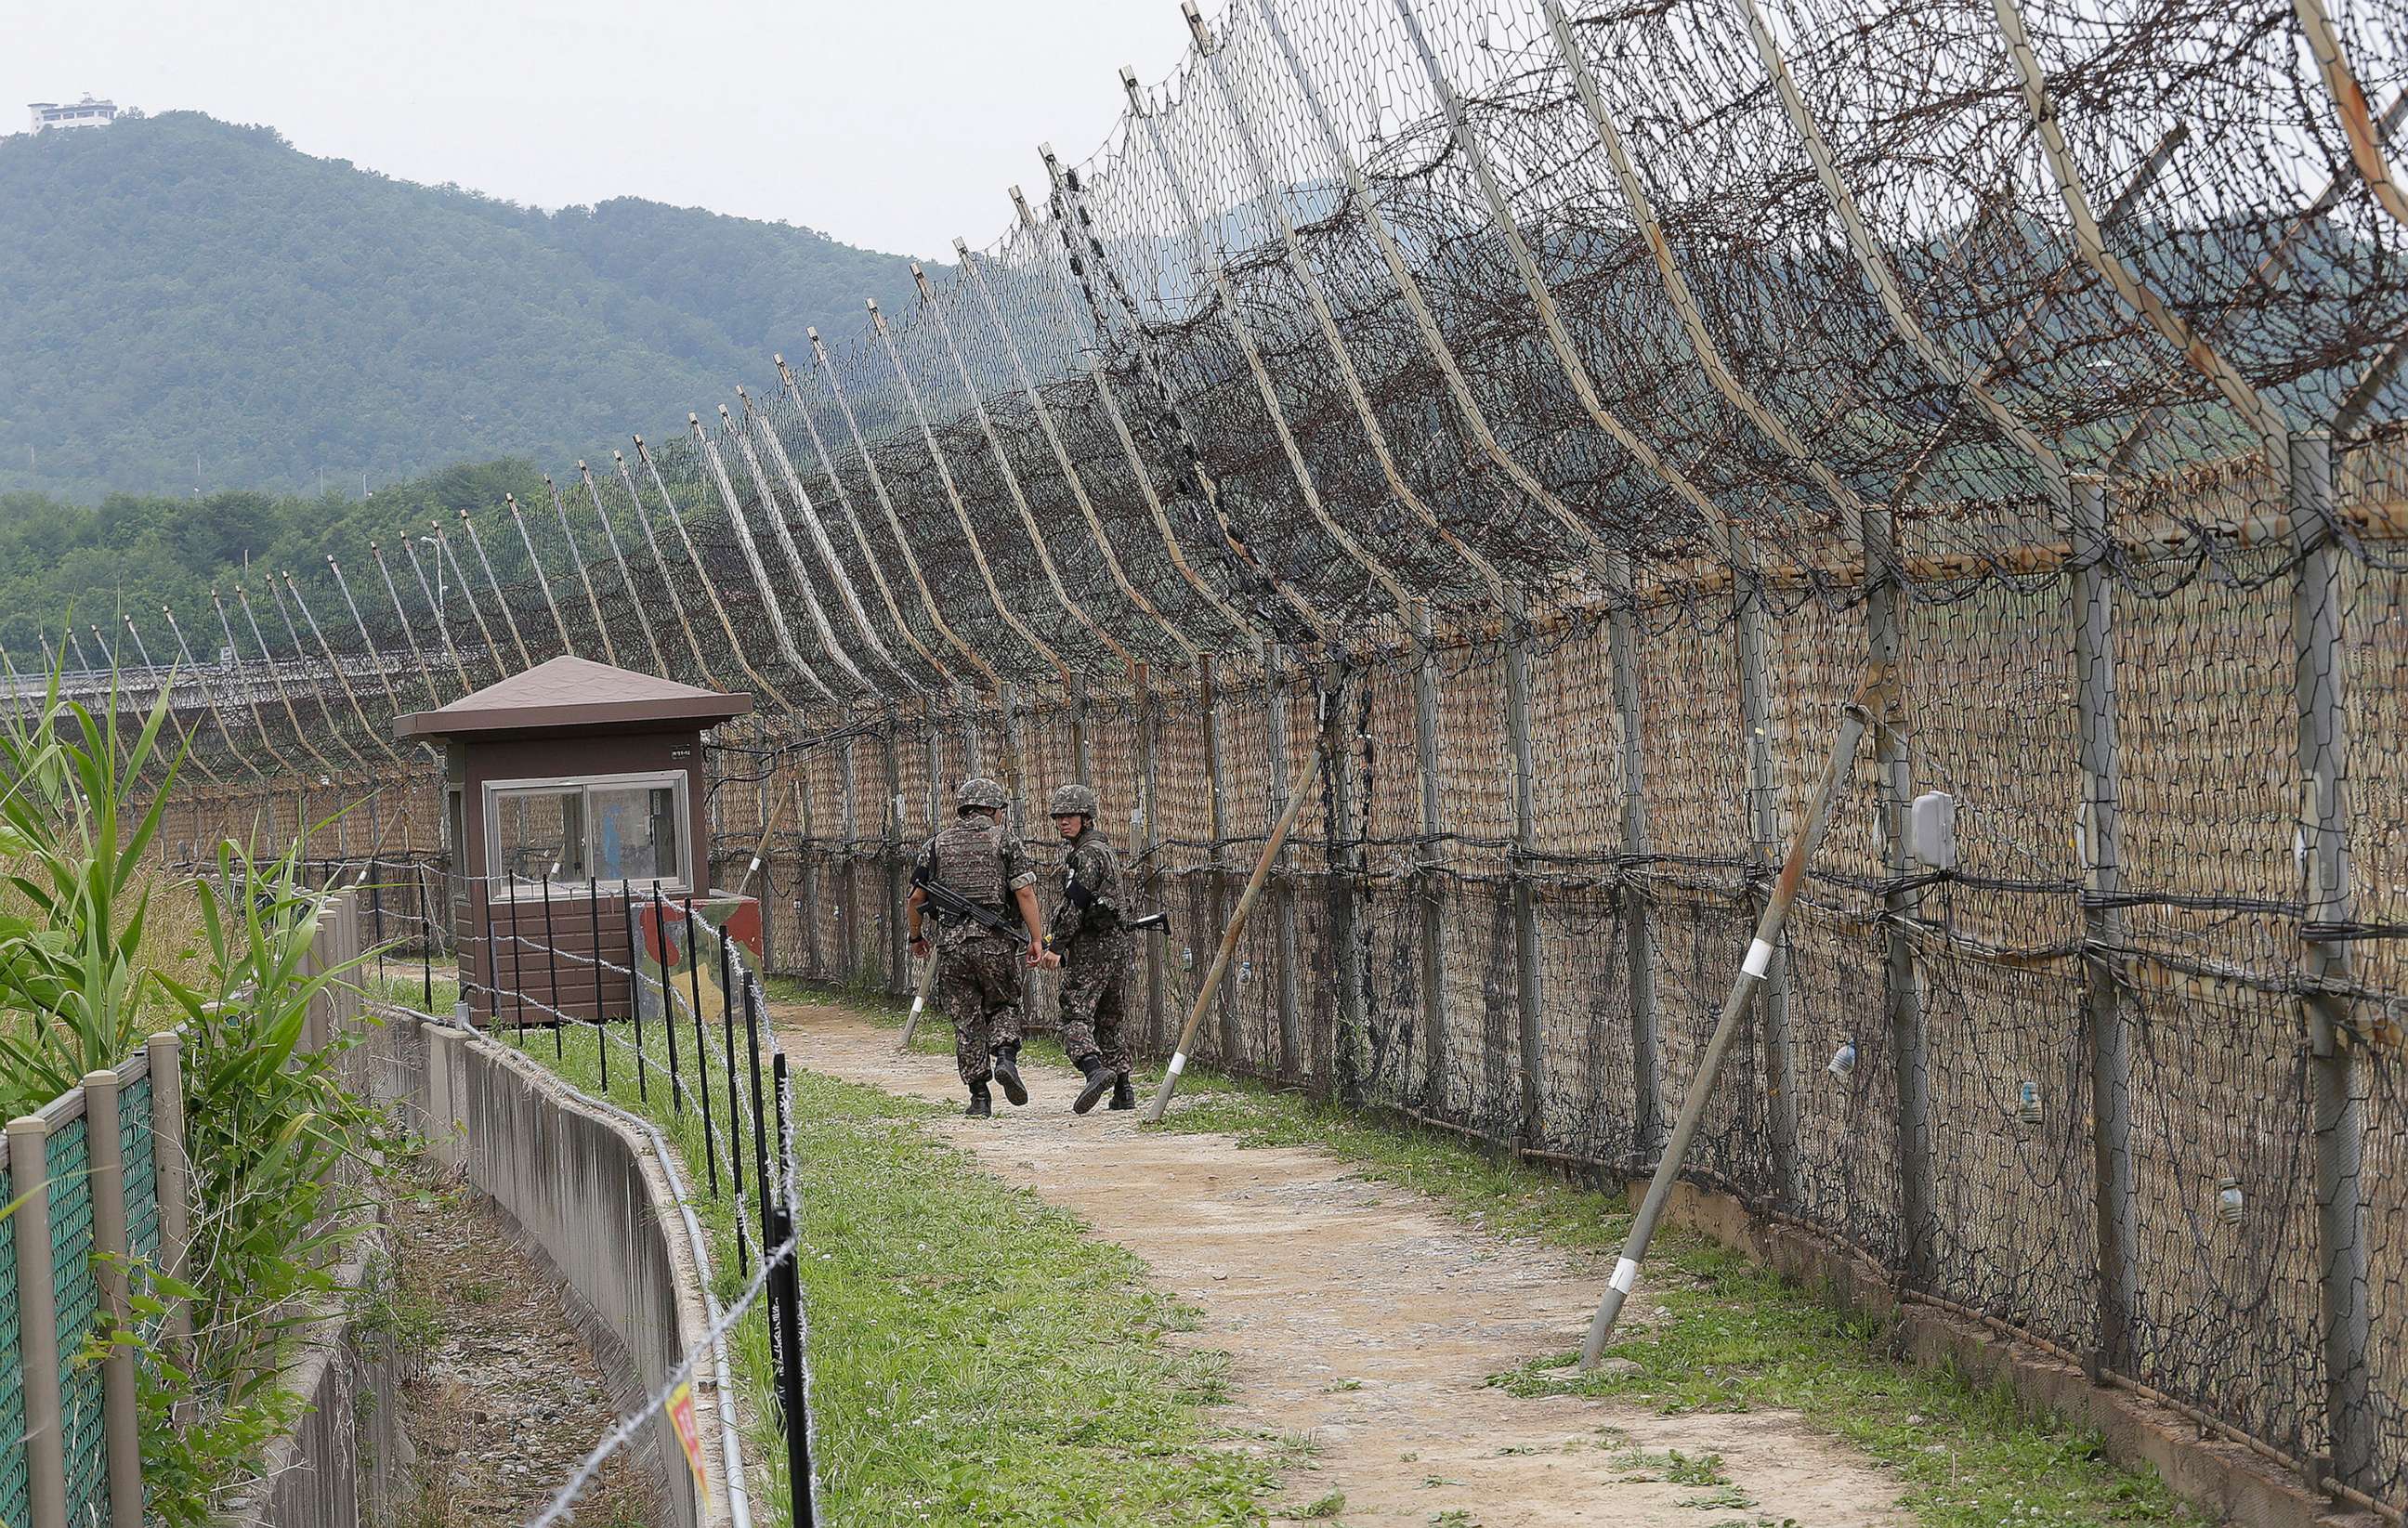 PHOTO: South Korean soldiers patrol while hikers visit the DMZ Peace Trail in the demilitarized zone in Goseong, South Korea on June 14, 2019.